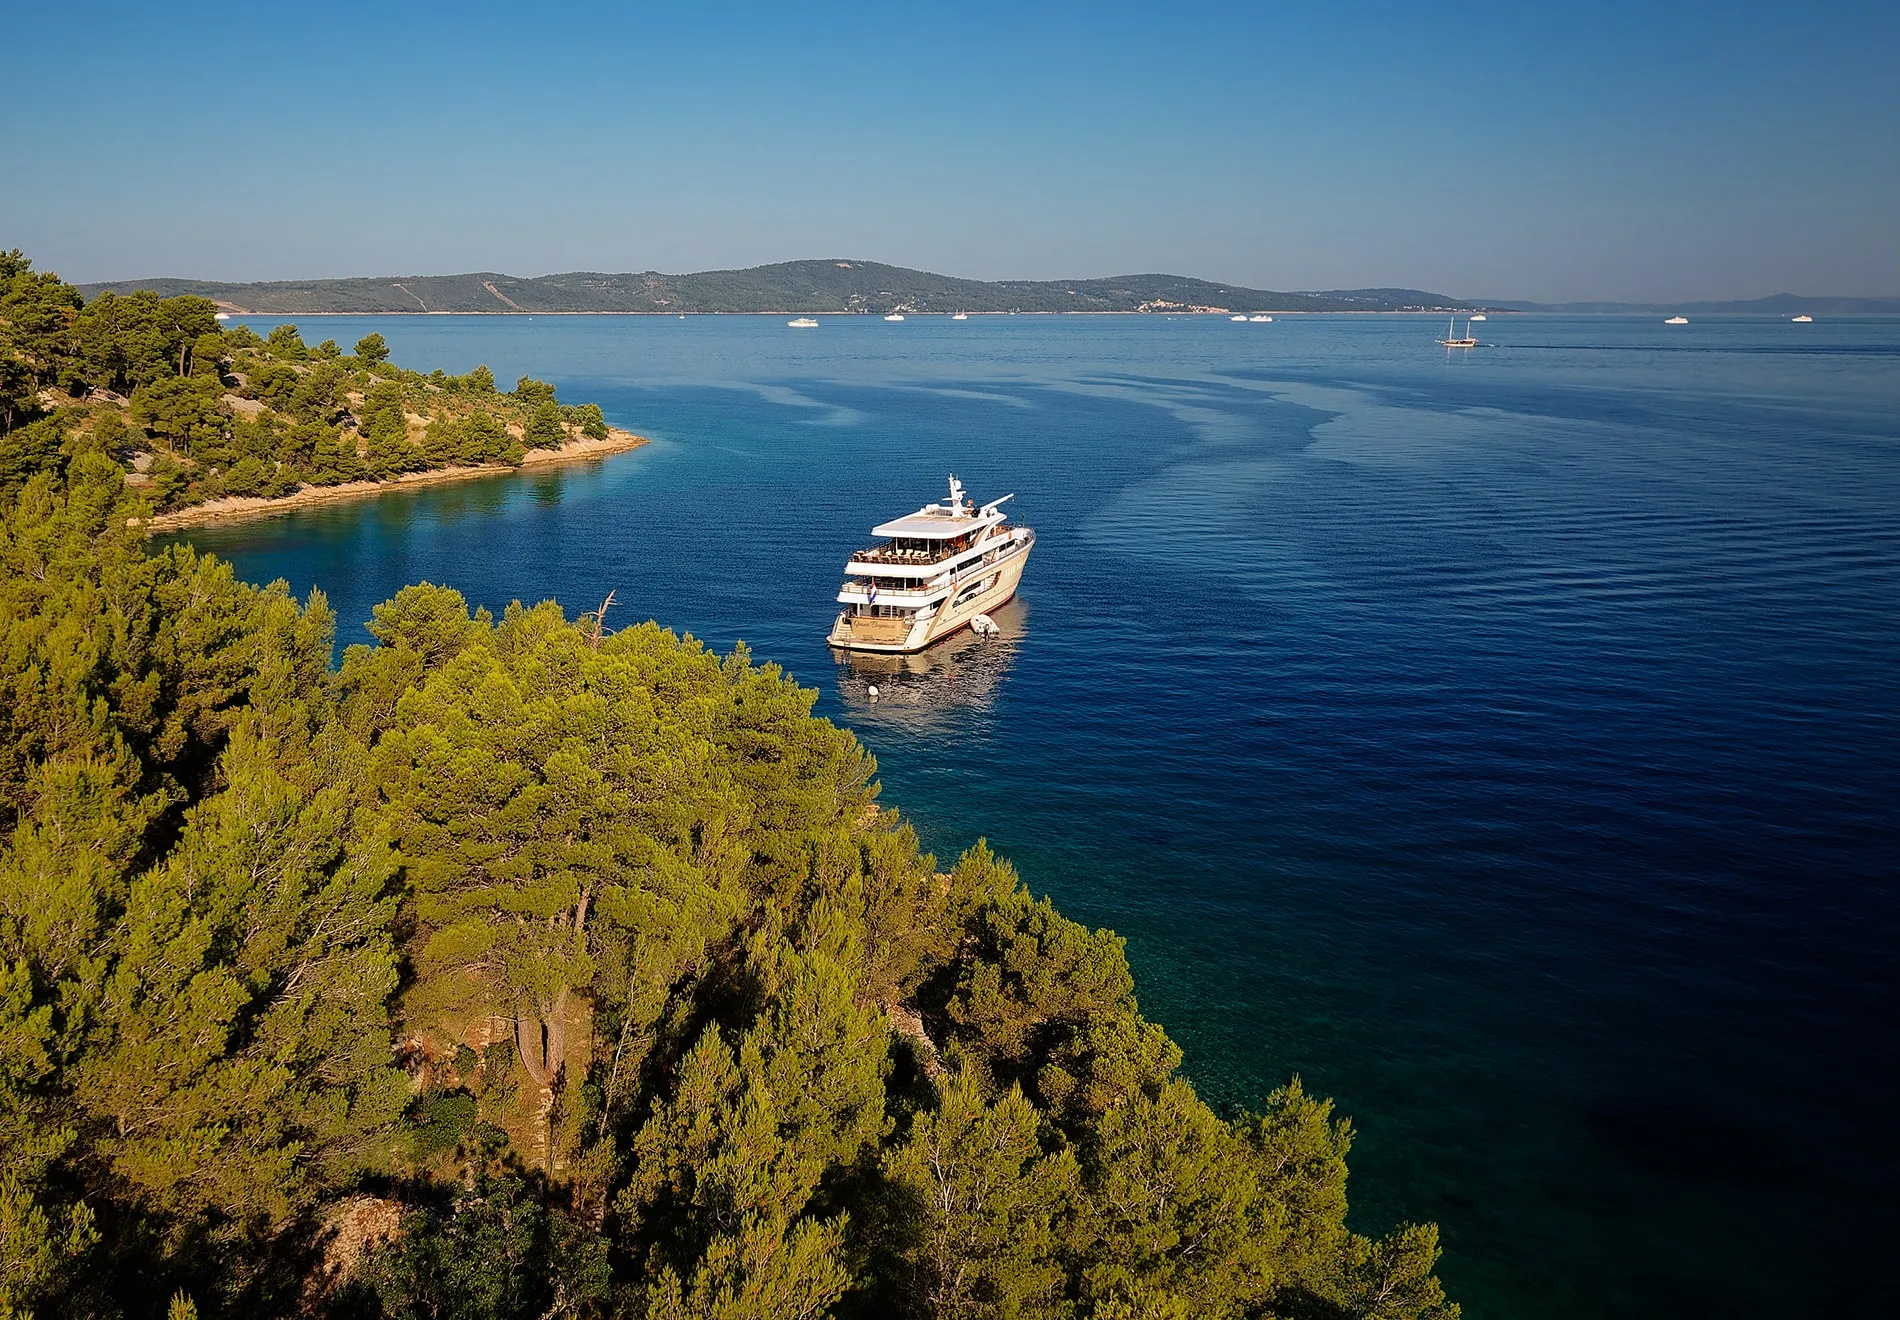 In your opinion, when is the optimal time to embark on a yacht charter in Croatia